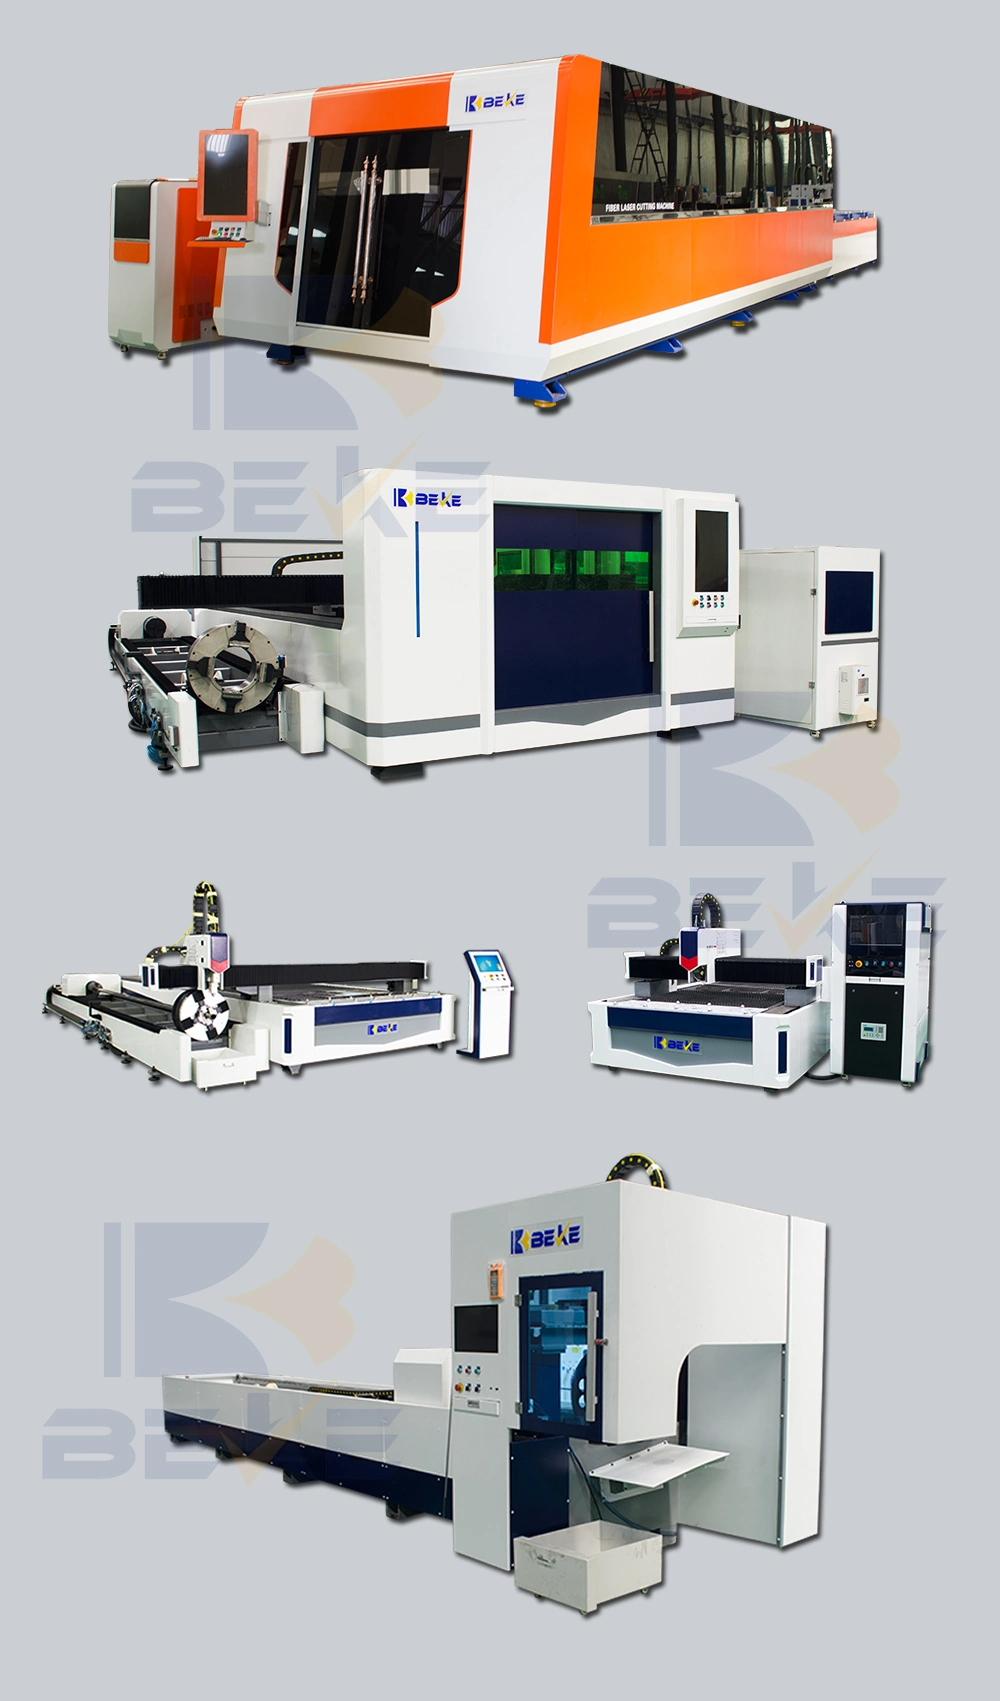 Nanjing Beke High Performance 1500W Double Work Table Carbon Plate CNC Laser Cutting Machine with CE